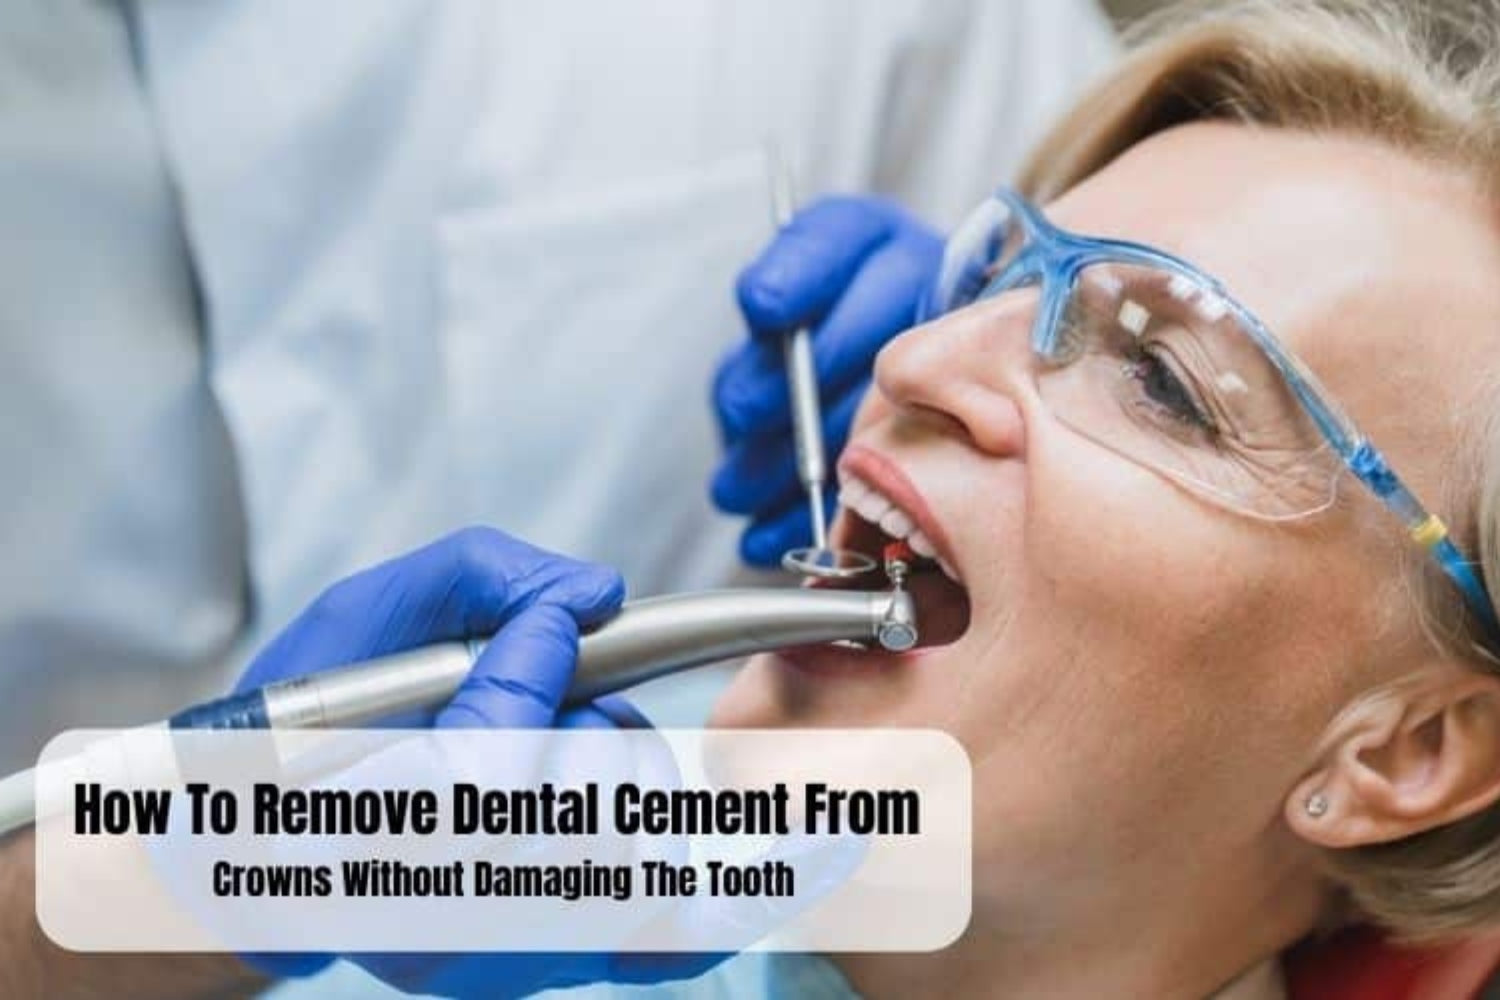 How To Remove Dental Cement From Crown?